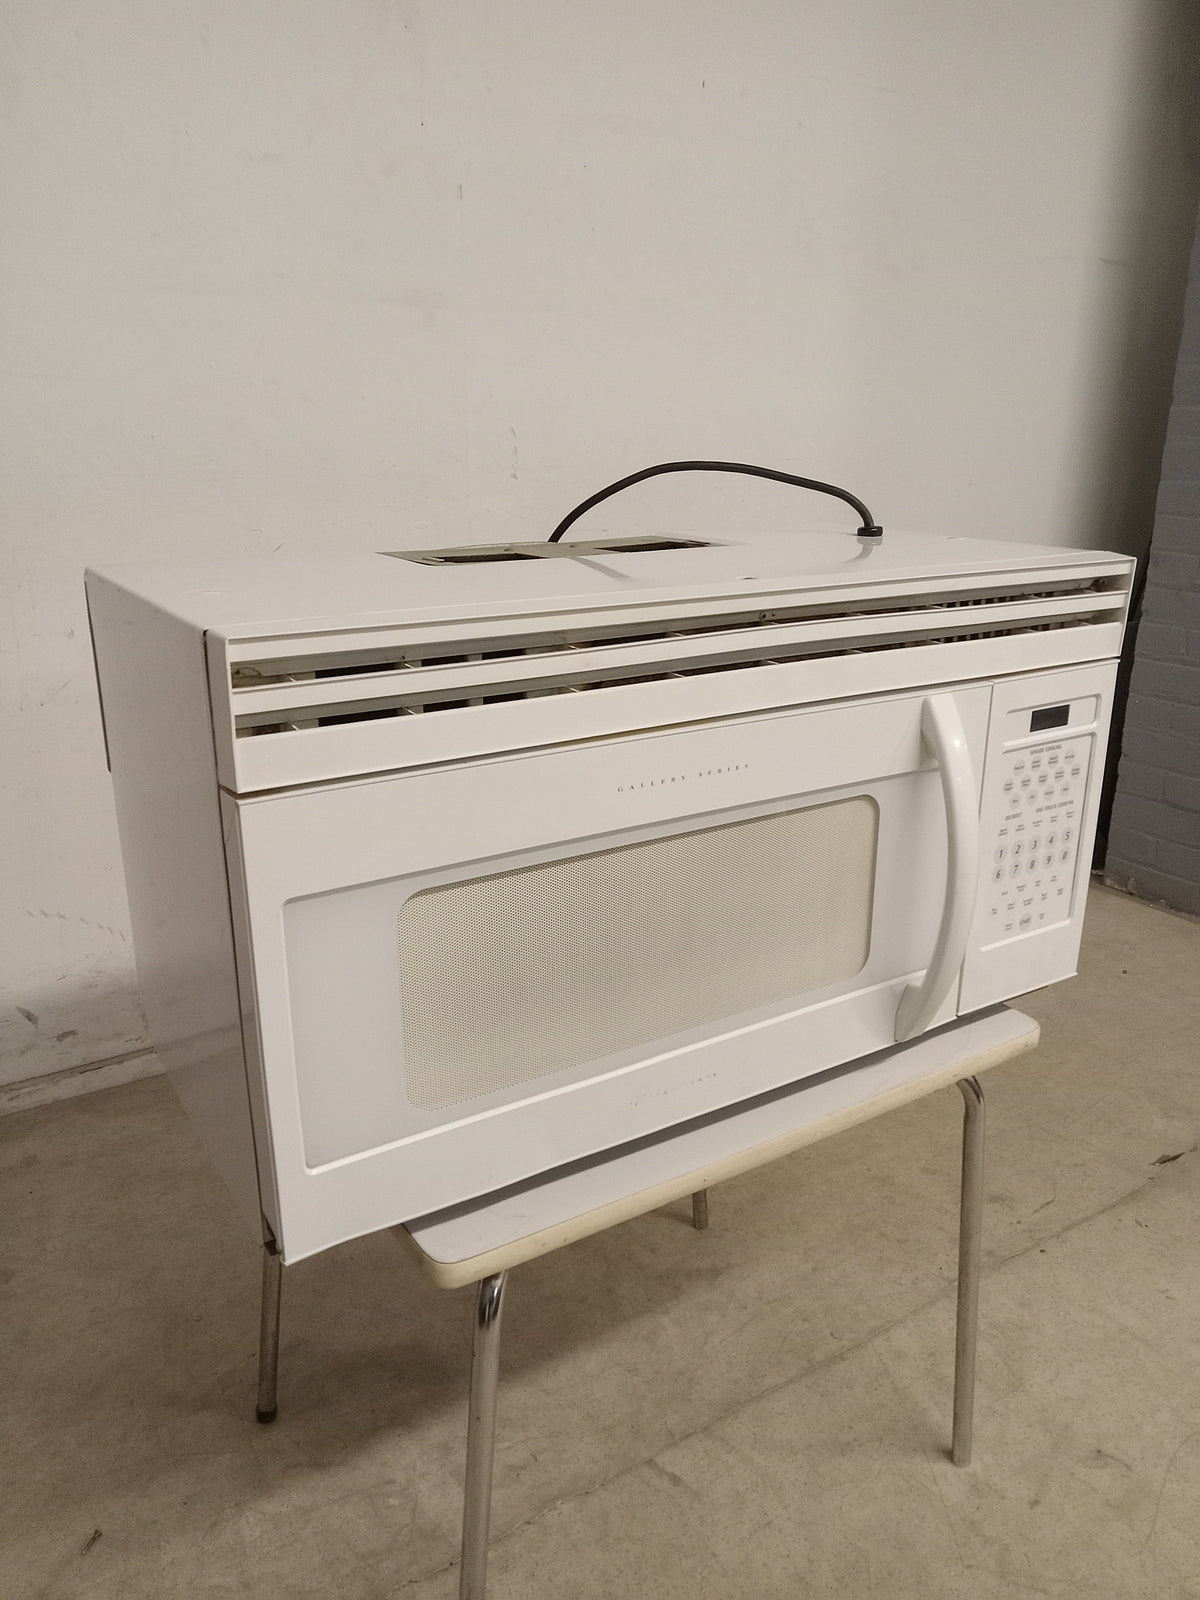 30"W Electrolux Over the Range Microwave Oven